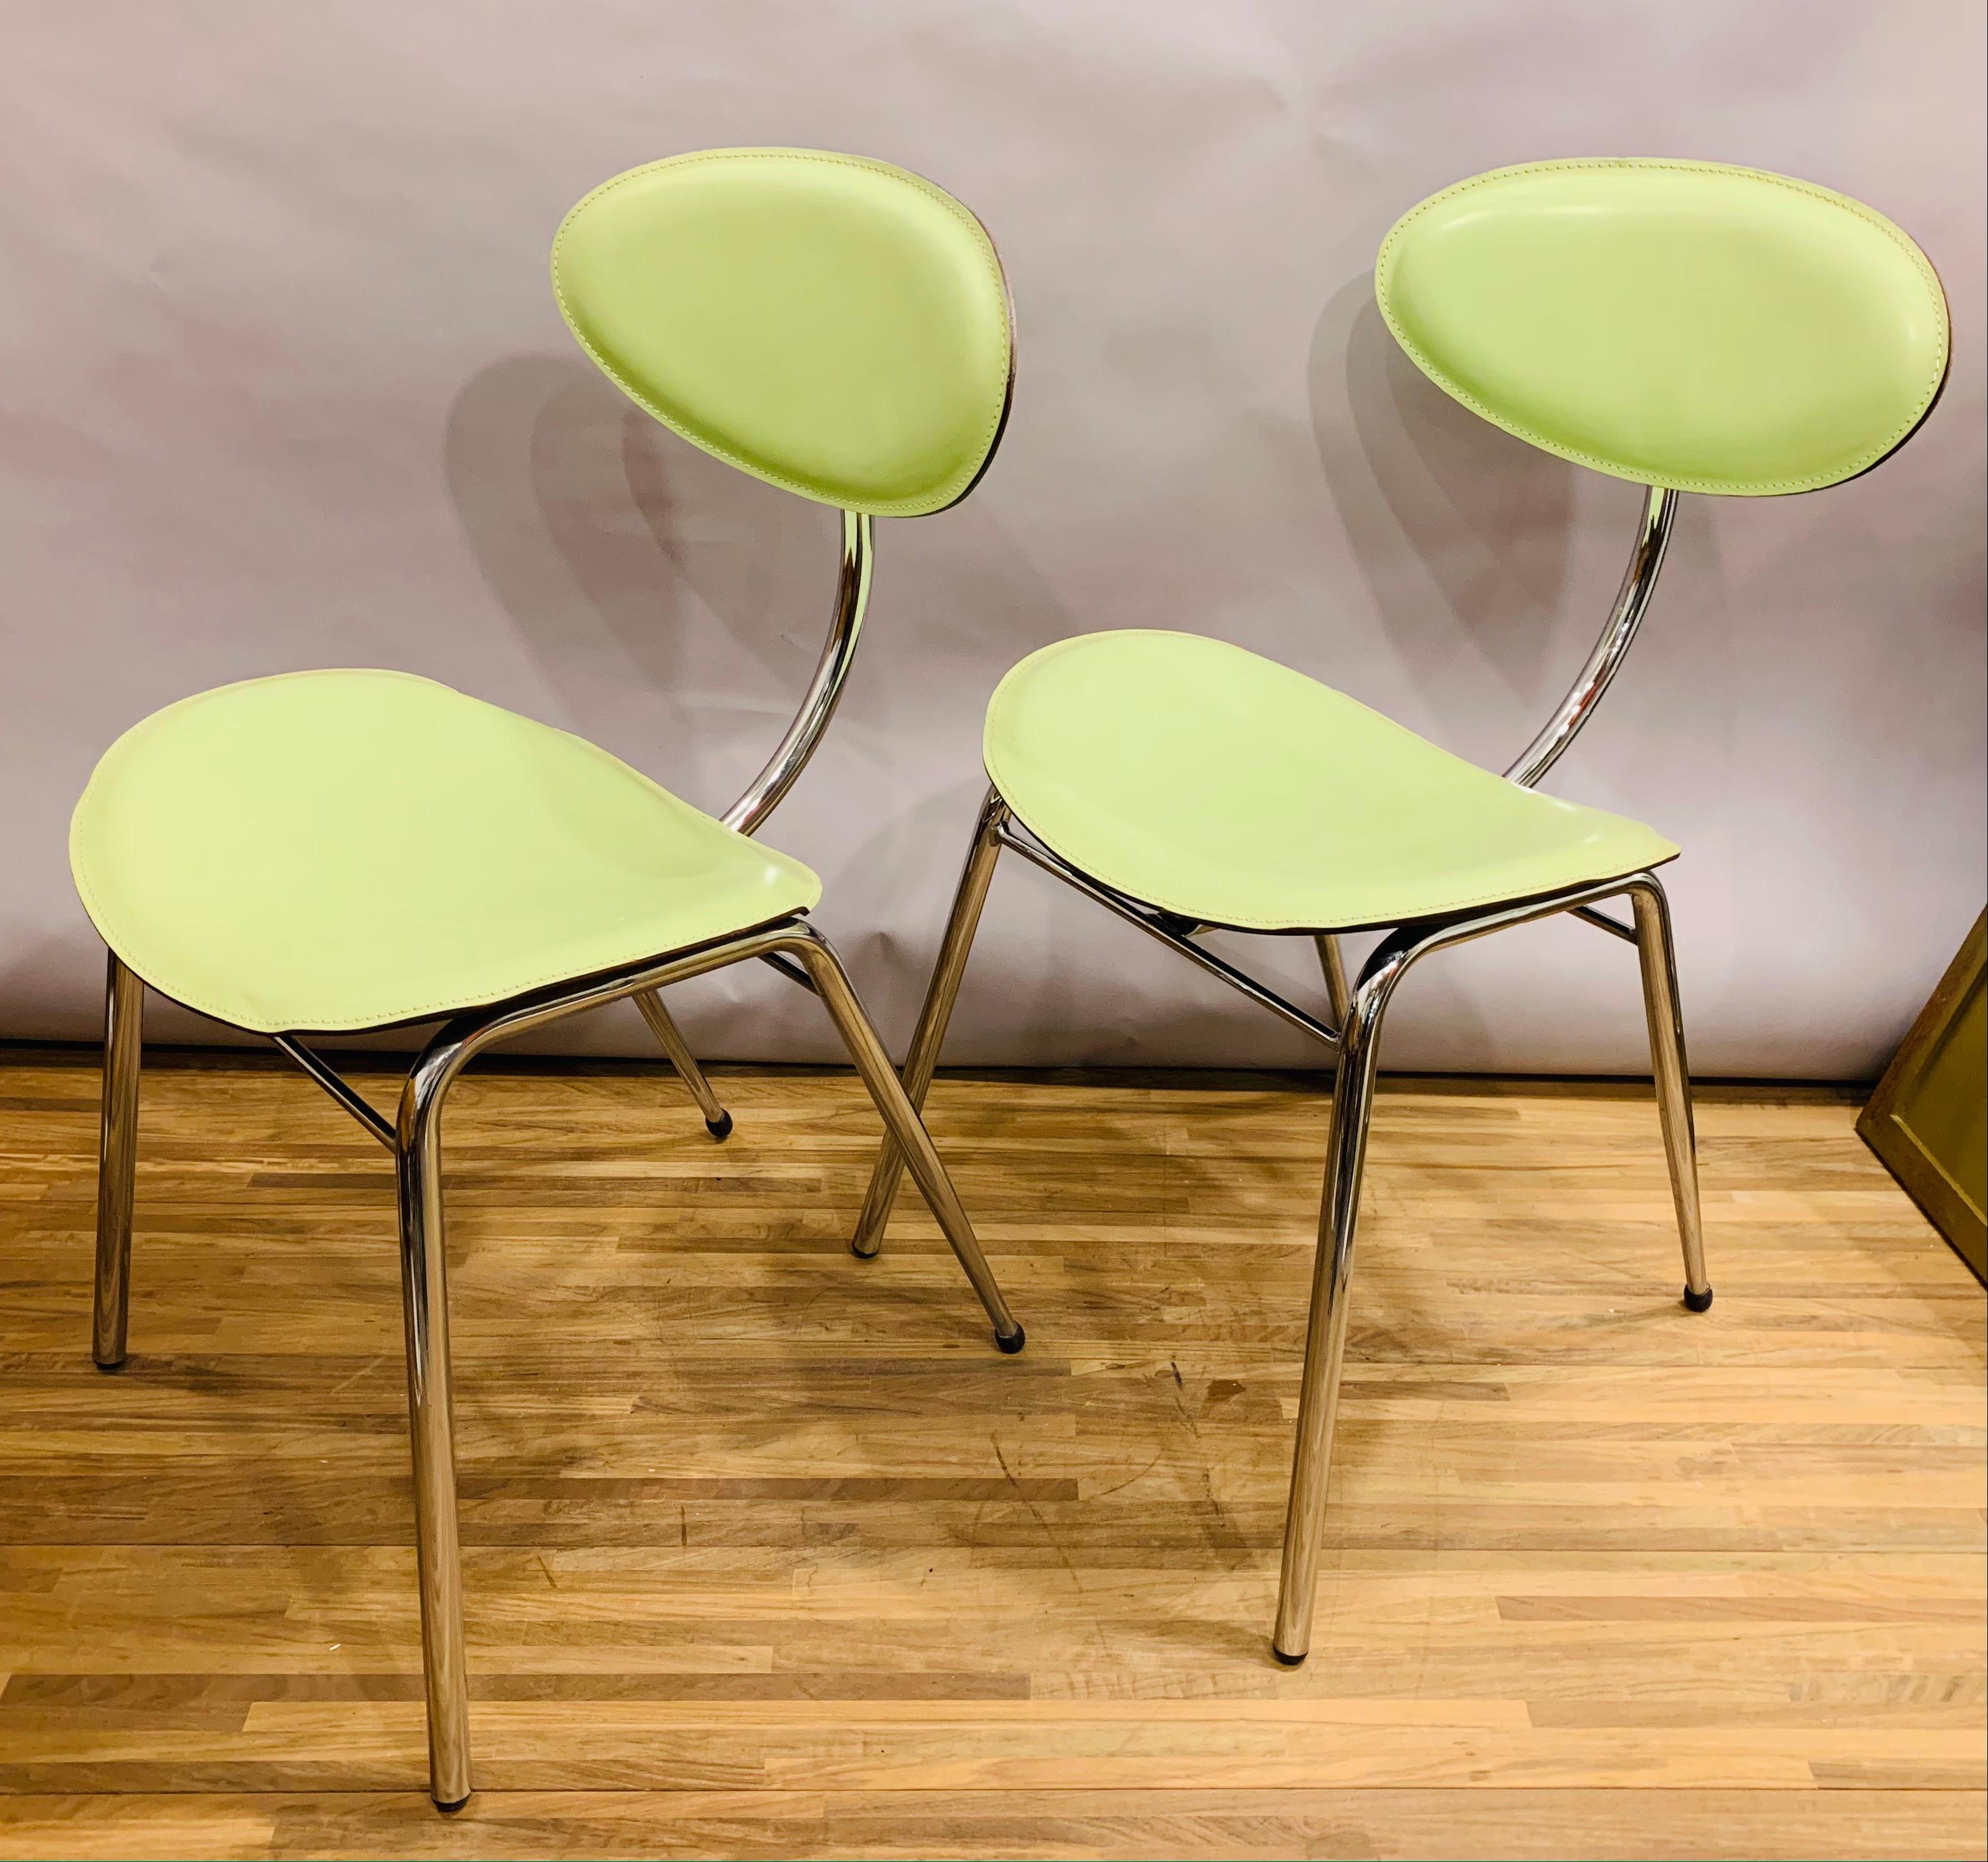 Post modern pair of 1980s Italian dining chairs manufactured by Arrben. The chairs are constructed from a slender yet solid, chromed-steel, frame. The seat and backrest are upholstered in their original lime green leather with stitching detail. The